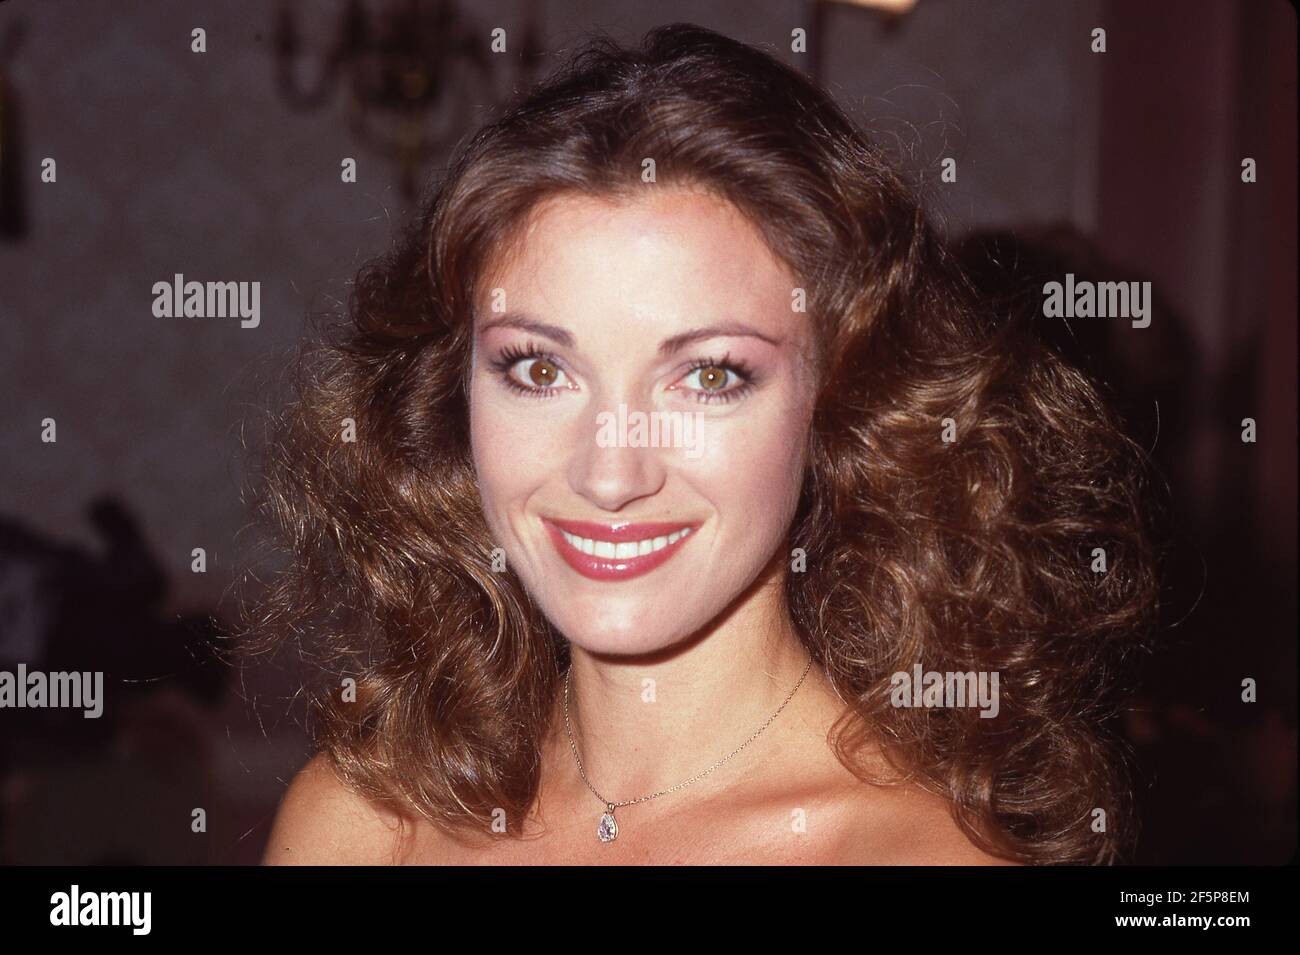 BEVERLY HILLS, CA - MARCH 8: Actress Jane Seymour attends Third Annual  Celebrity Mother-Daughter Fashion Show on March 8, 1984 at the Beverly  Hilton Hotel in Beverly Hills, California Credit: Ralph DominguezMediaPunch